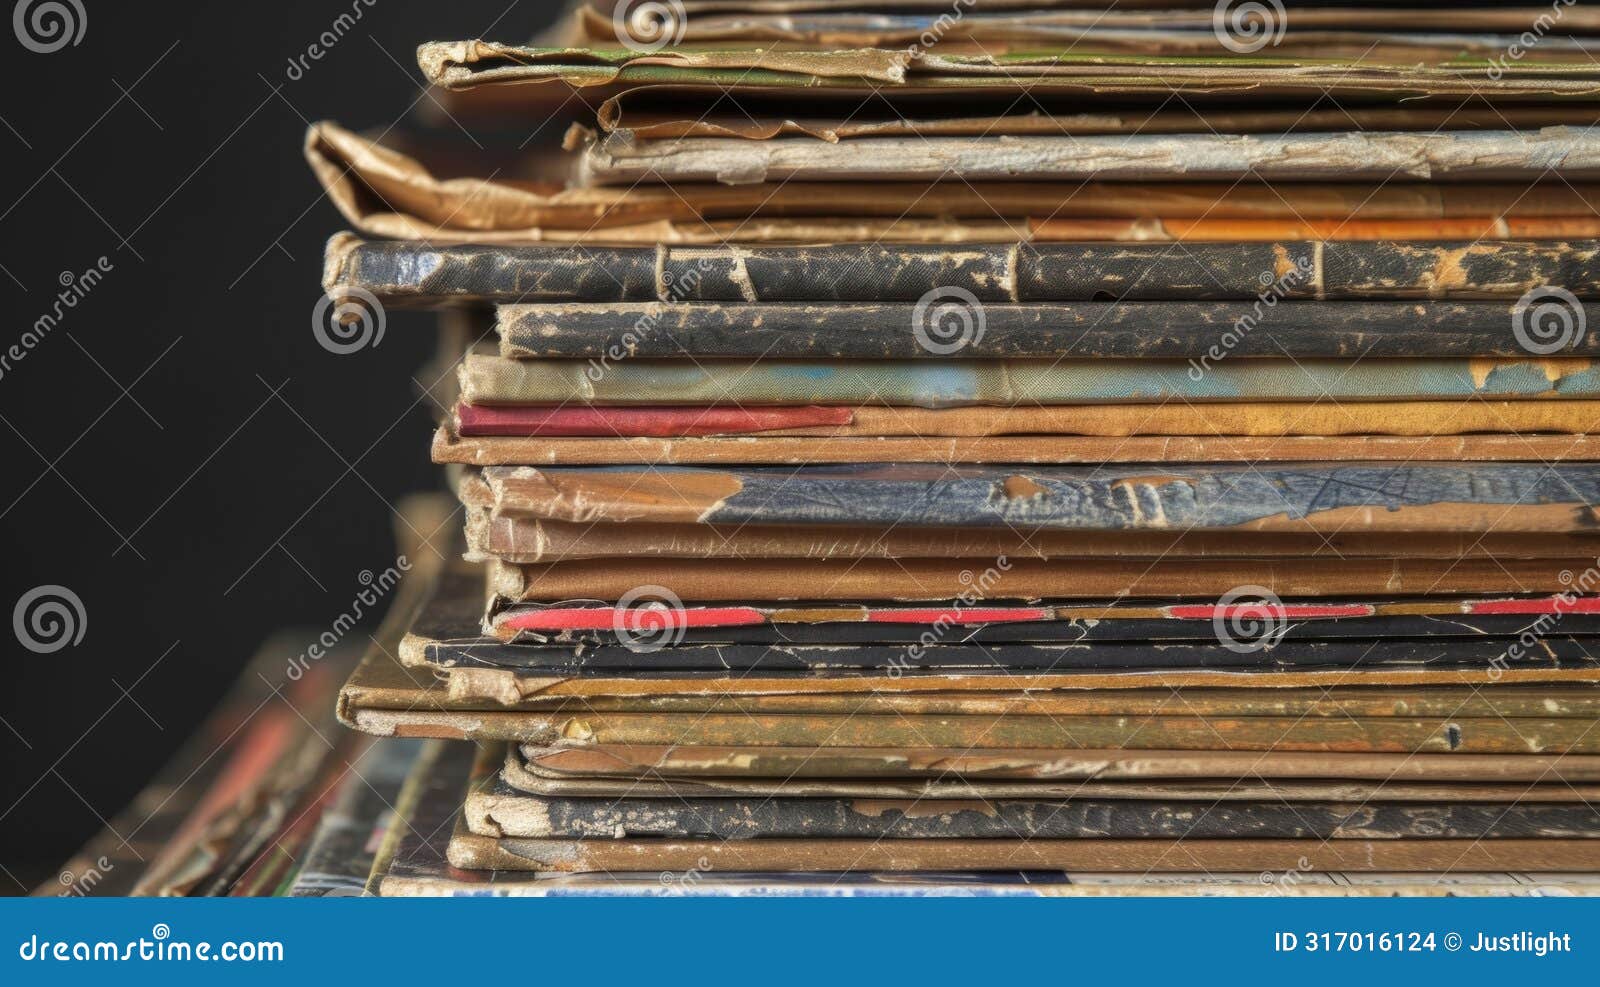 a stack of dusty records each one loaded with nostalgic and sentimental value